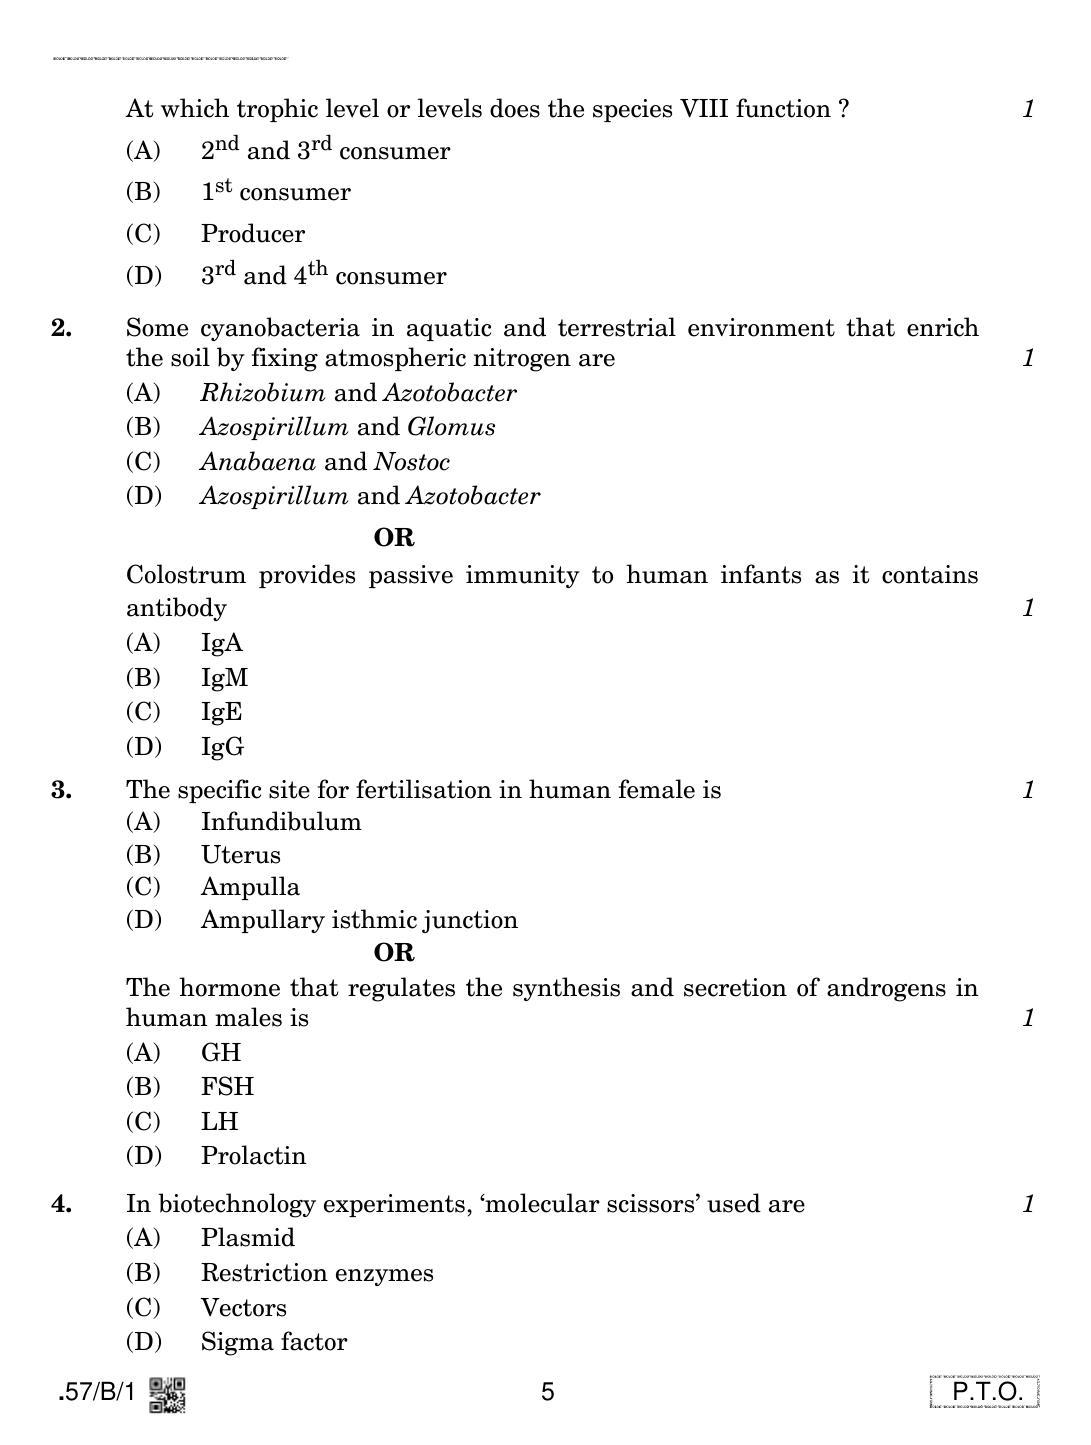 CBSE Class 12 57-C-1 - Biology 2020 Compartment Question Paper - Page 5